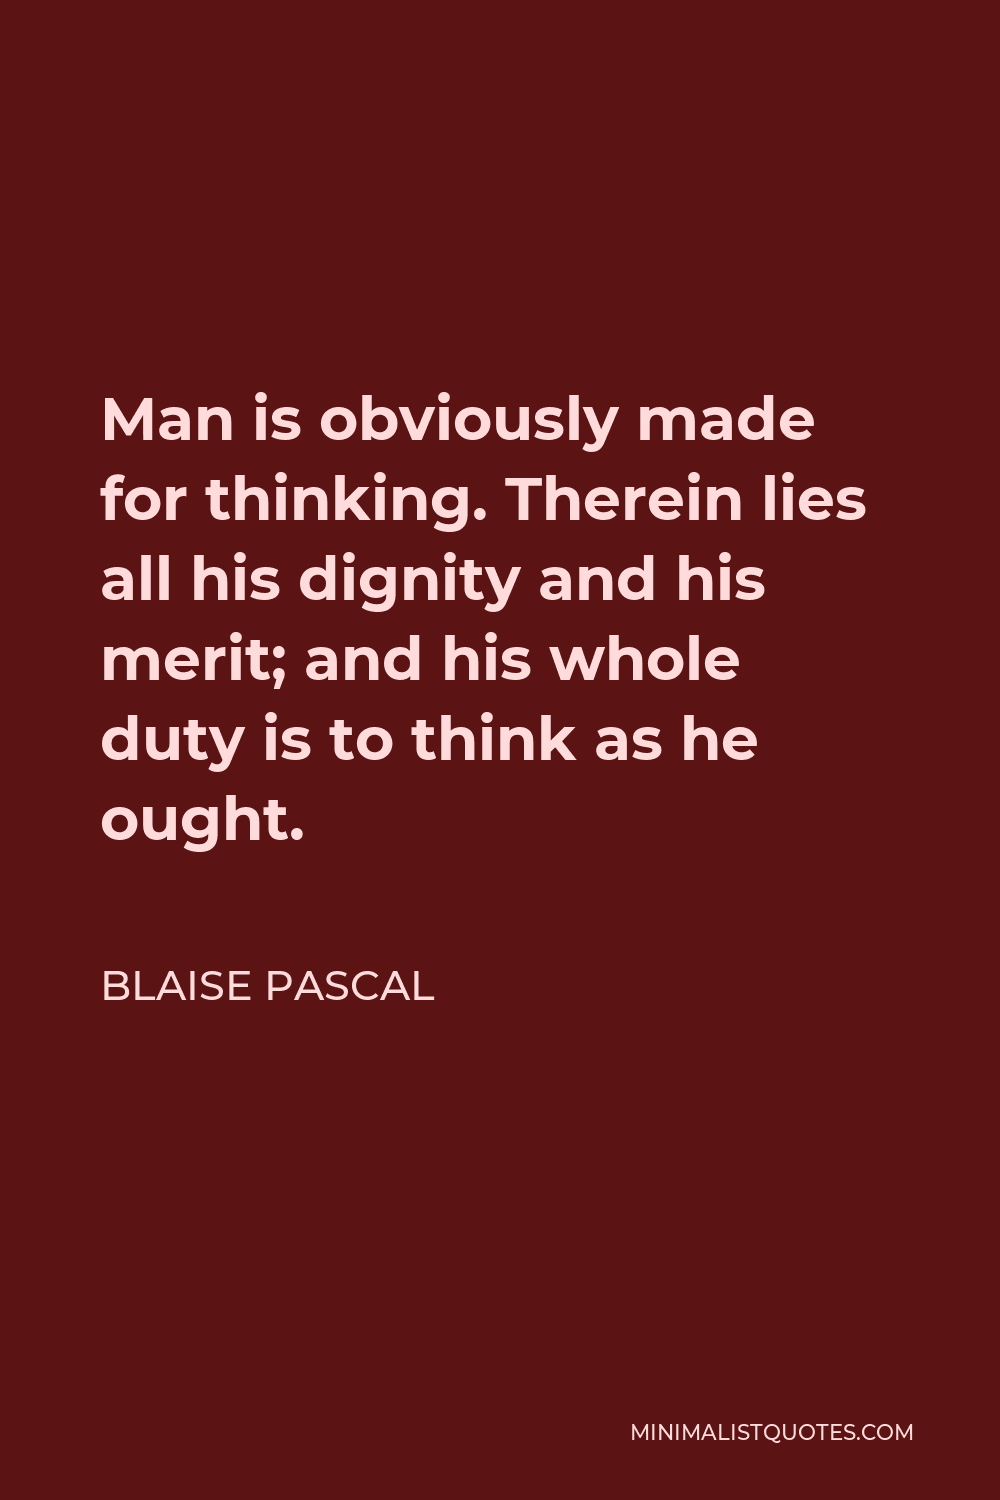 Blaise Pascal Quote - Man is obviously made for thinking. Therein lies all his dignity and his merit; and his whole duty is to think as he ought.